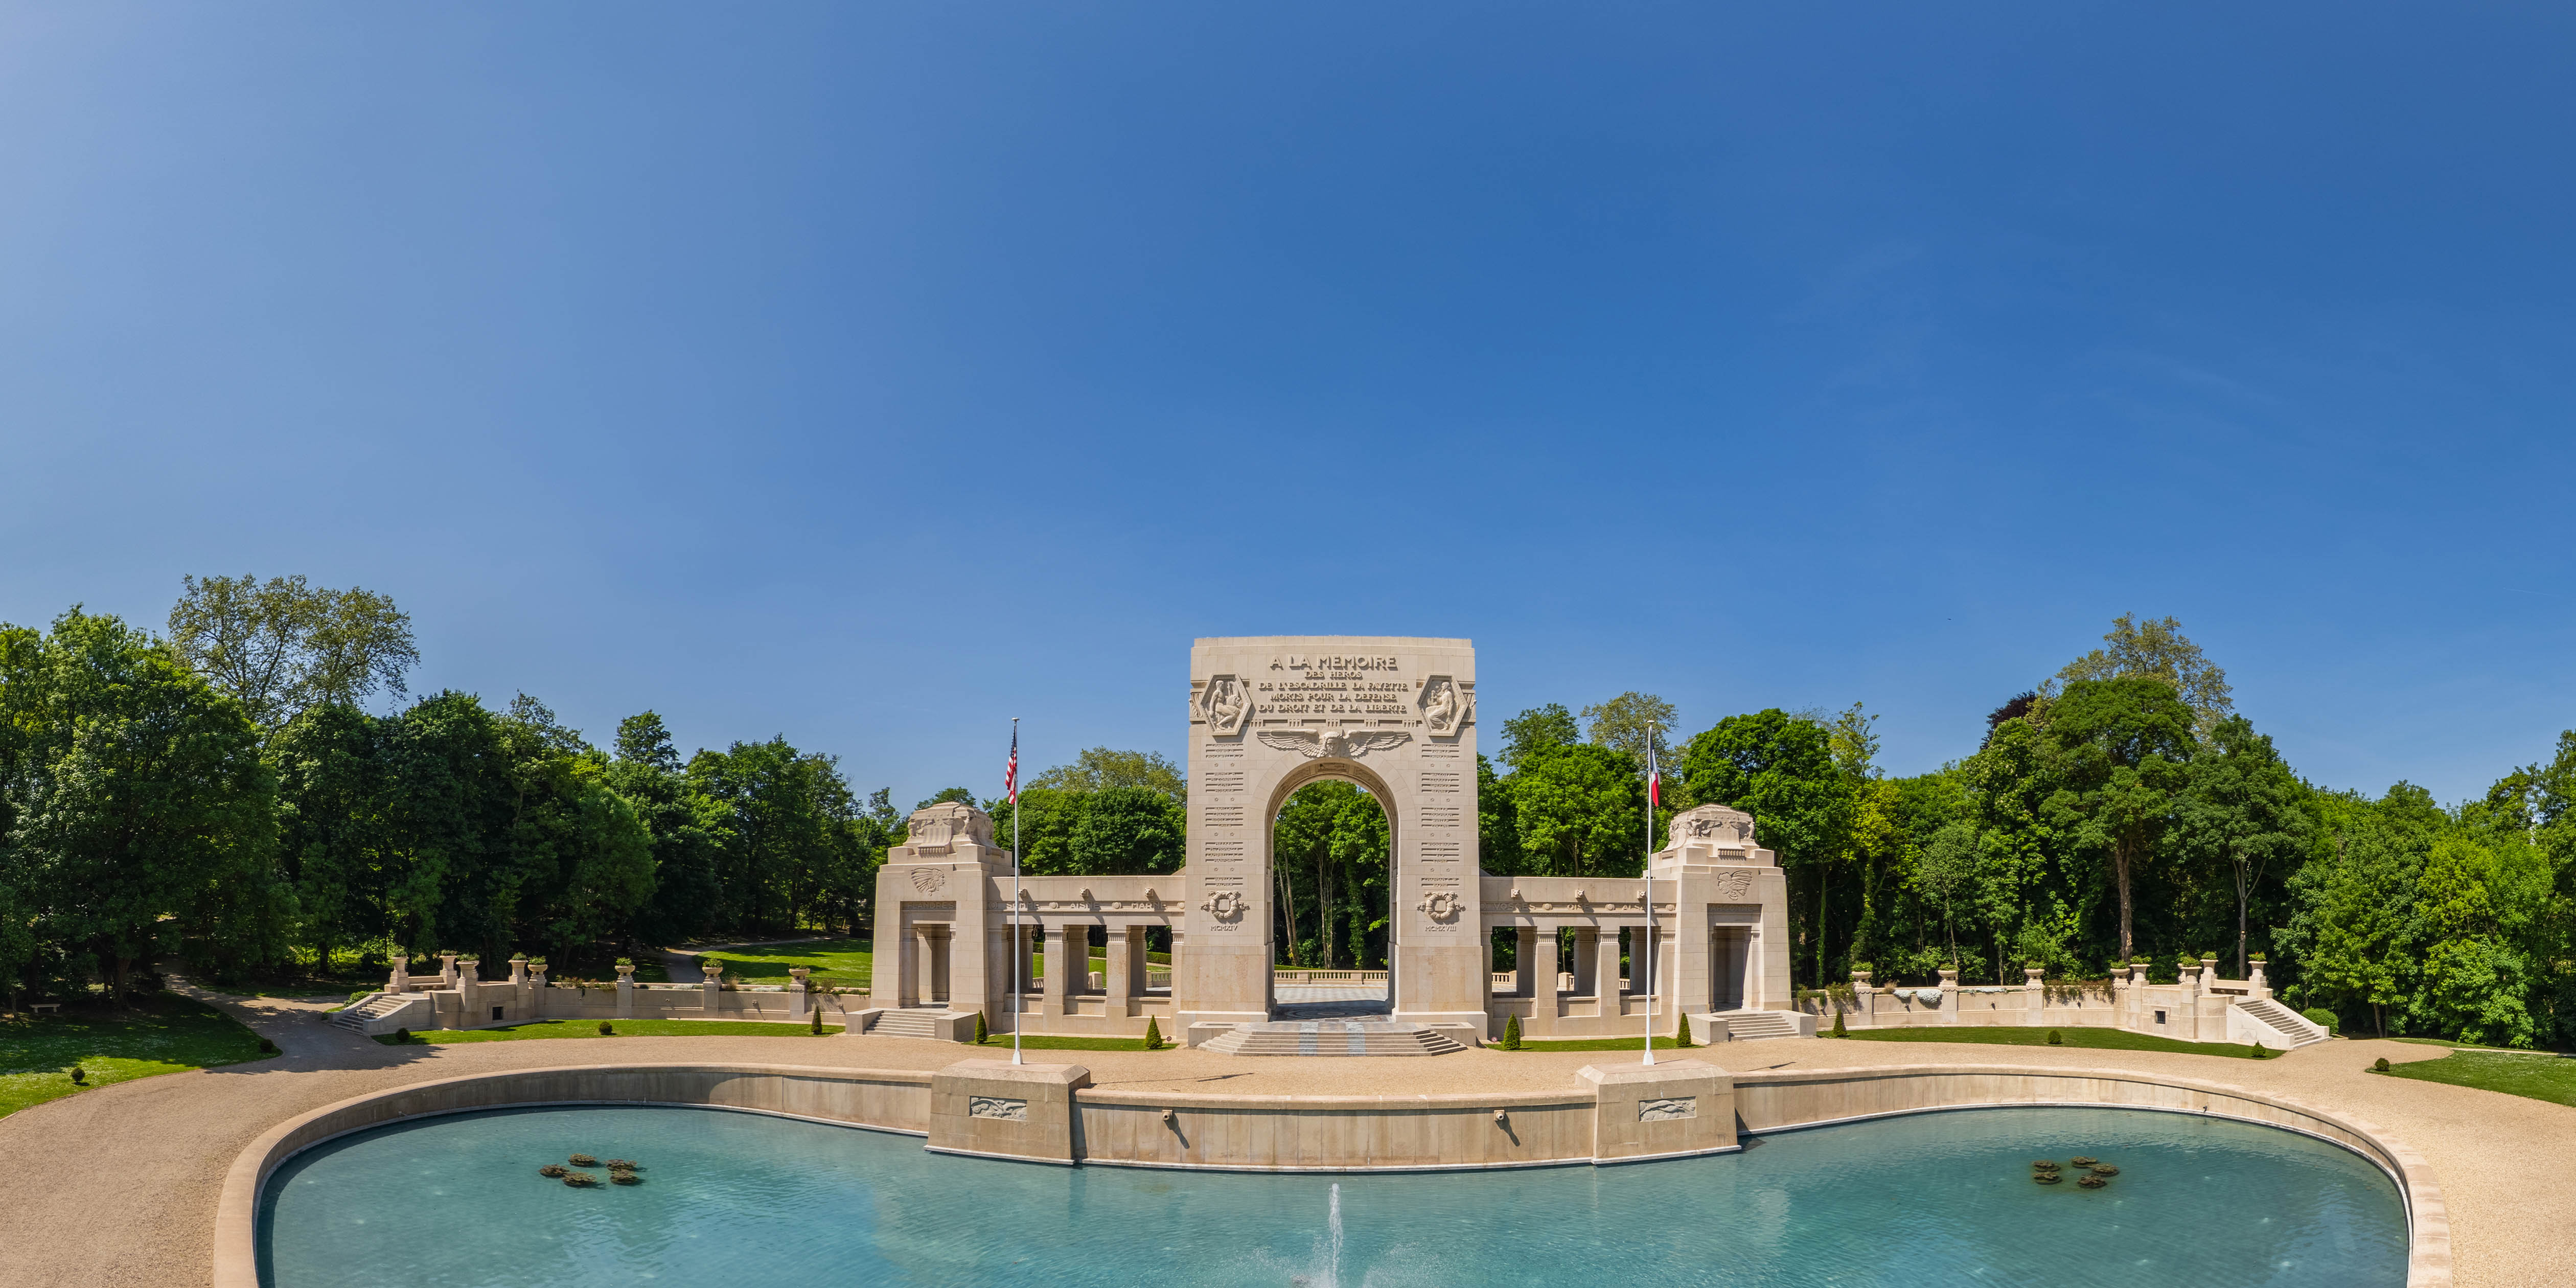 Panoramic view of Lafayette Escadrille Memorial Cemetery from virtual tour